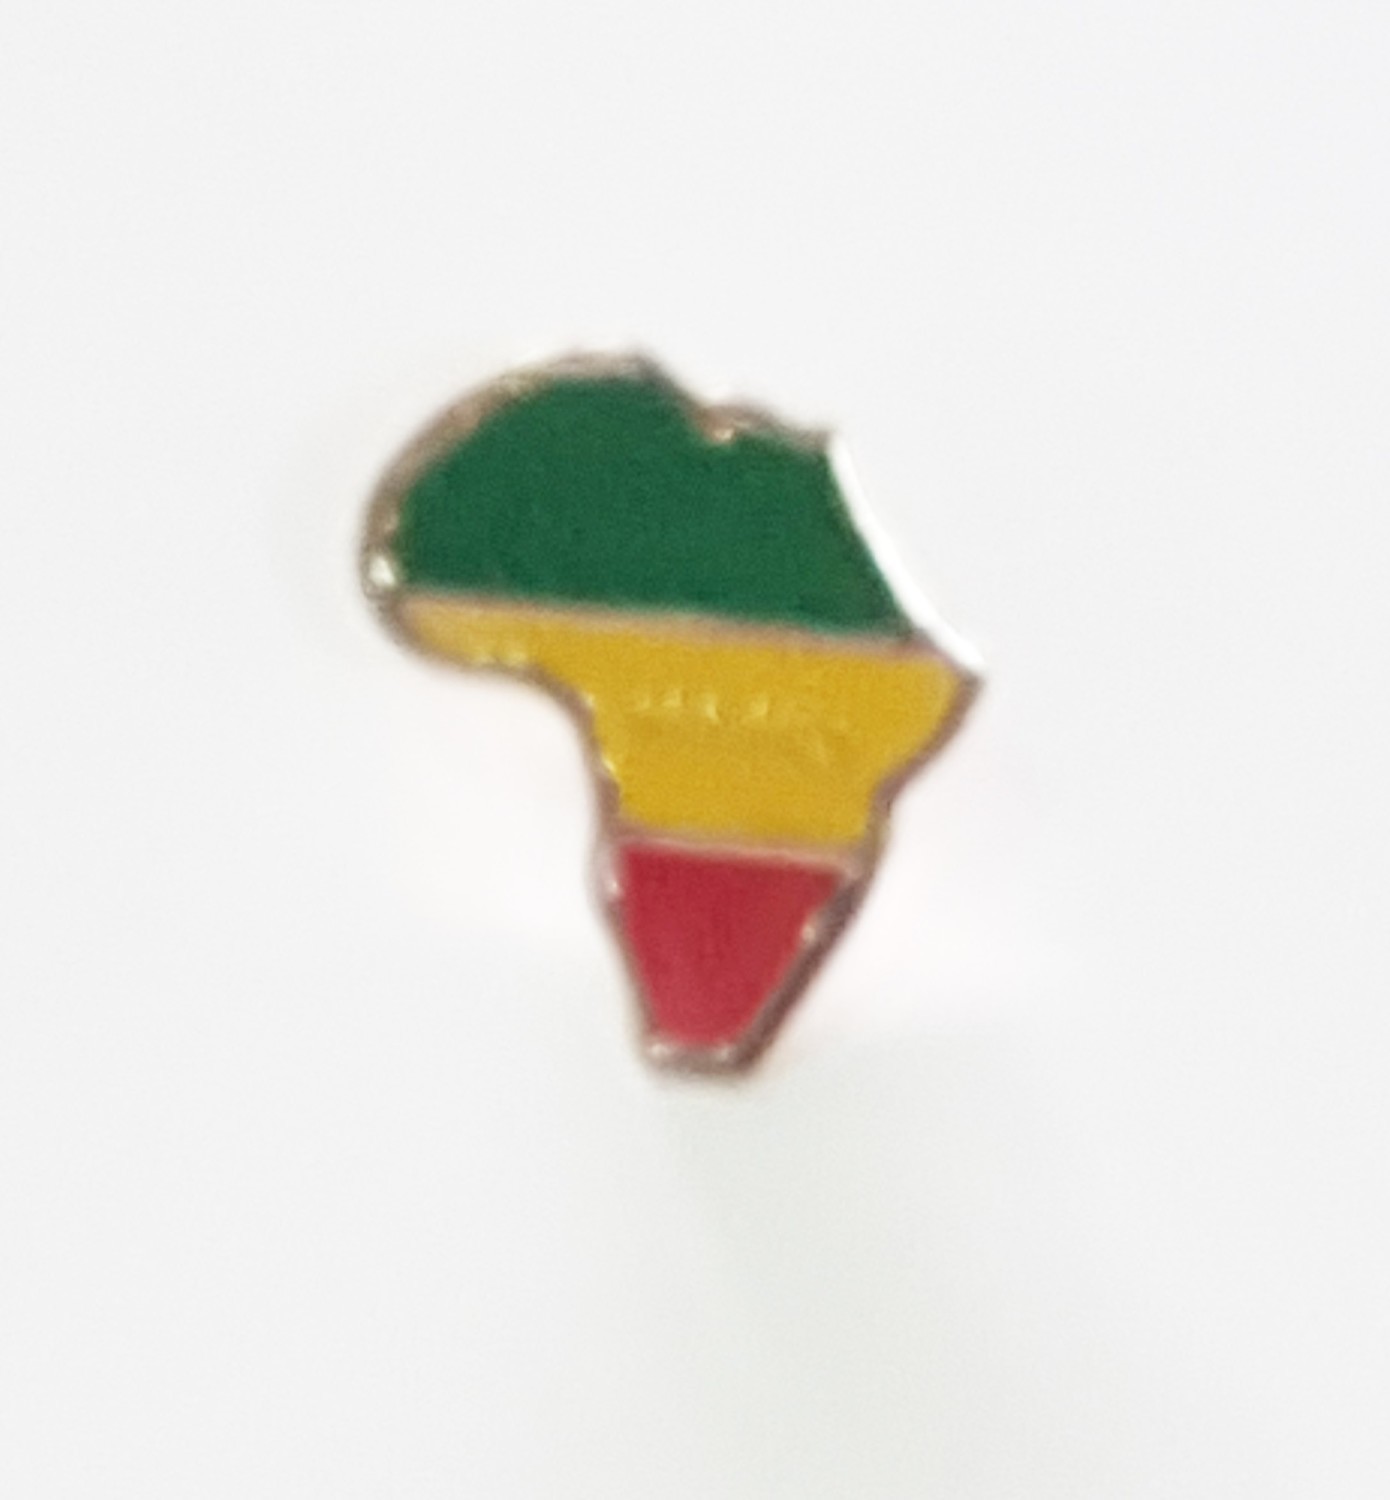 Afrika Map (Green, Yellow, and Red) Pin